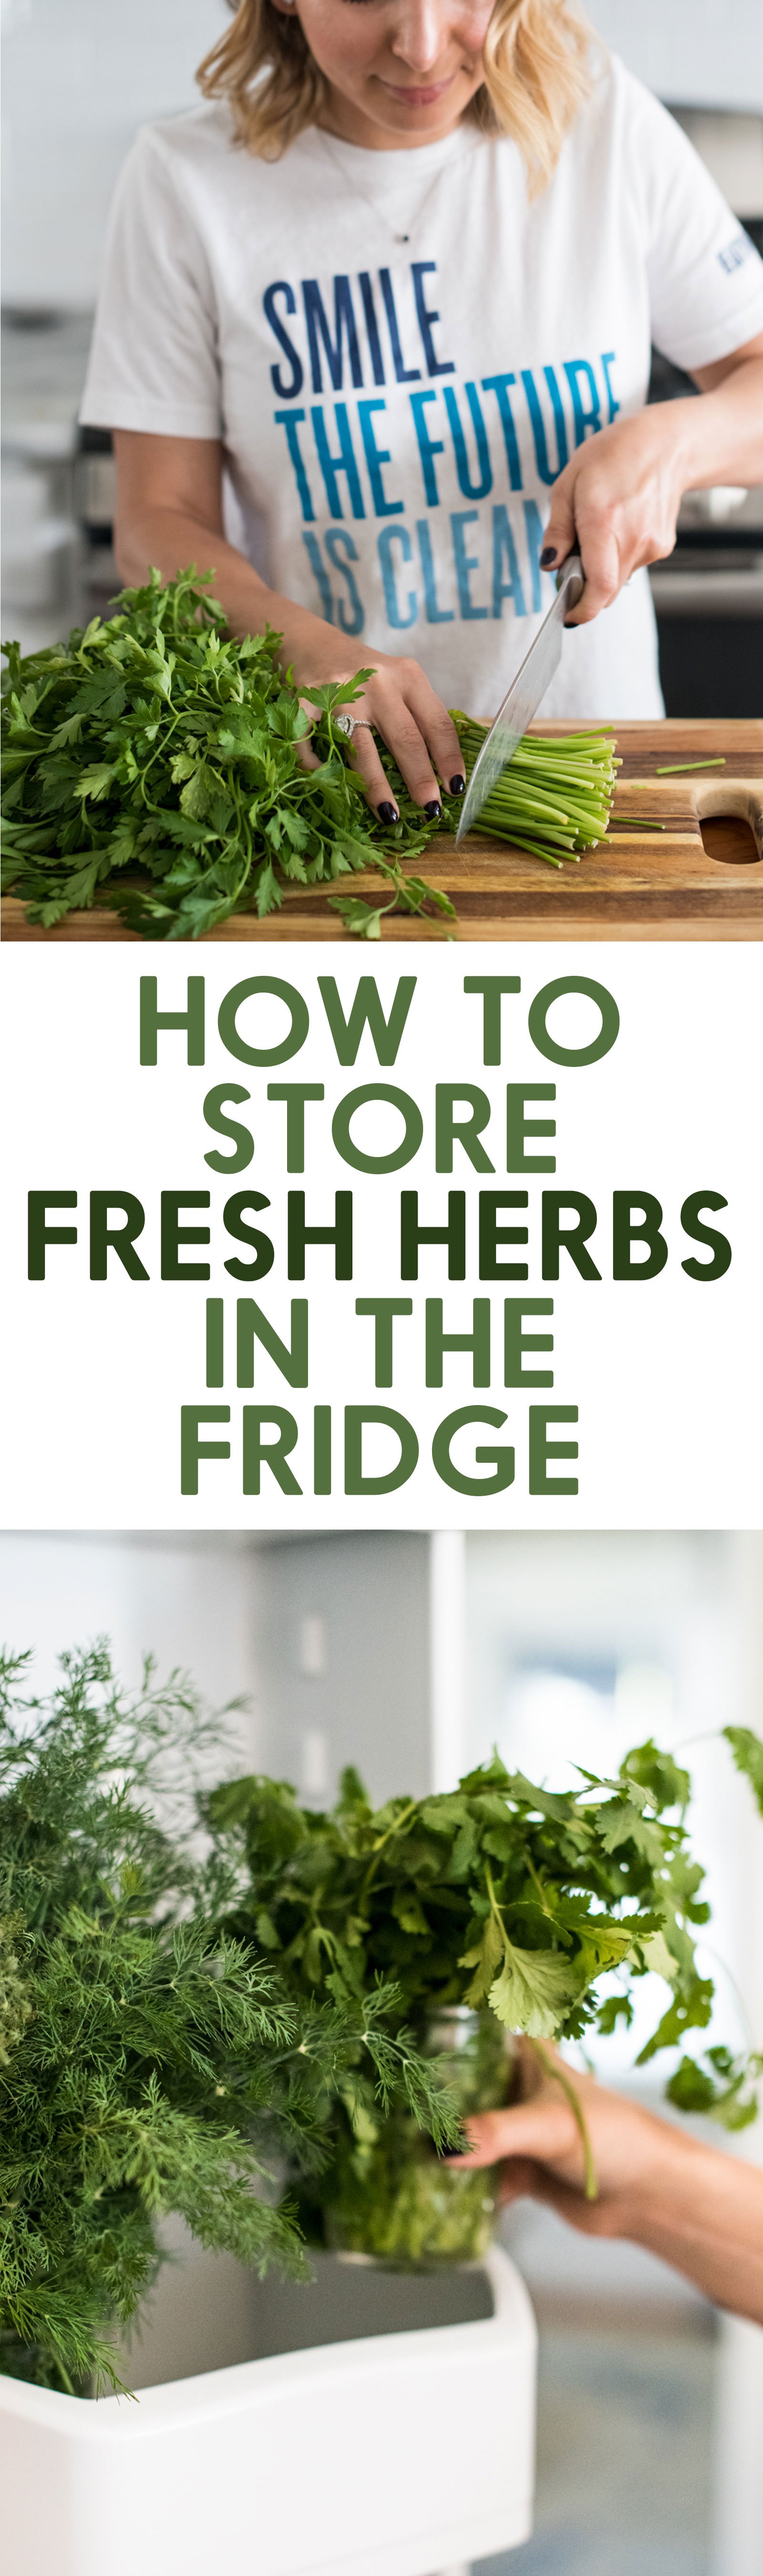 Lexi S Clean Kitchen How To Store Fresh Herbs In The Refrigerator,How To Make A Buttery Nipple Shot Recipe